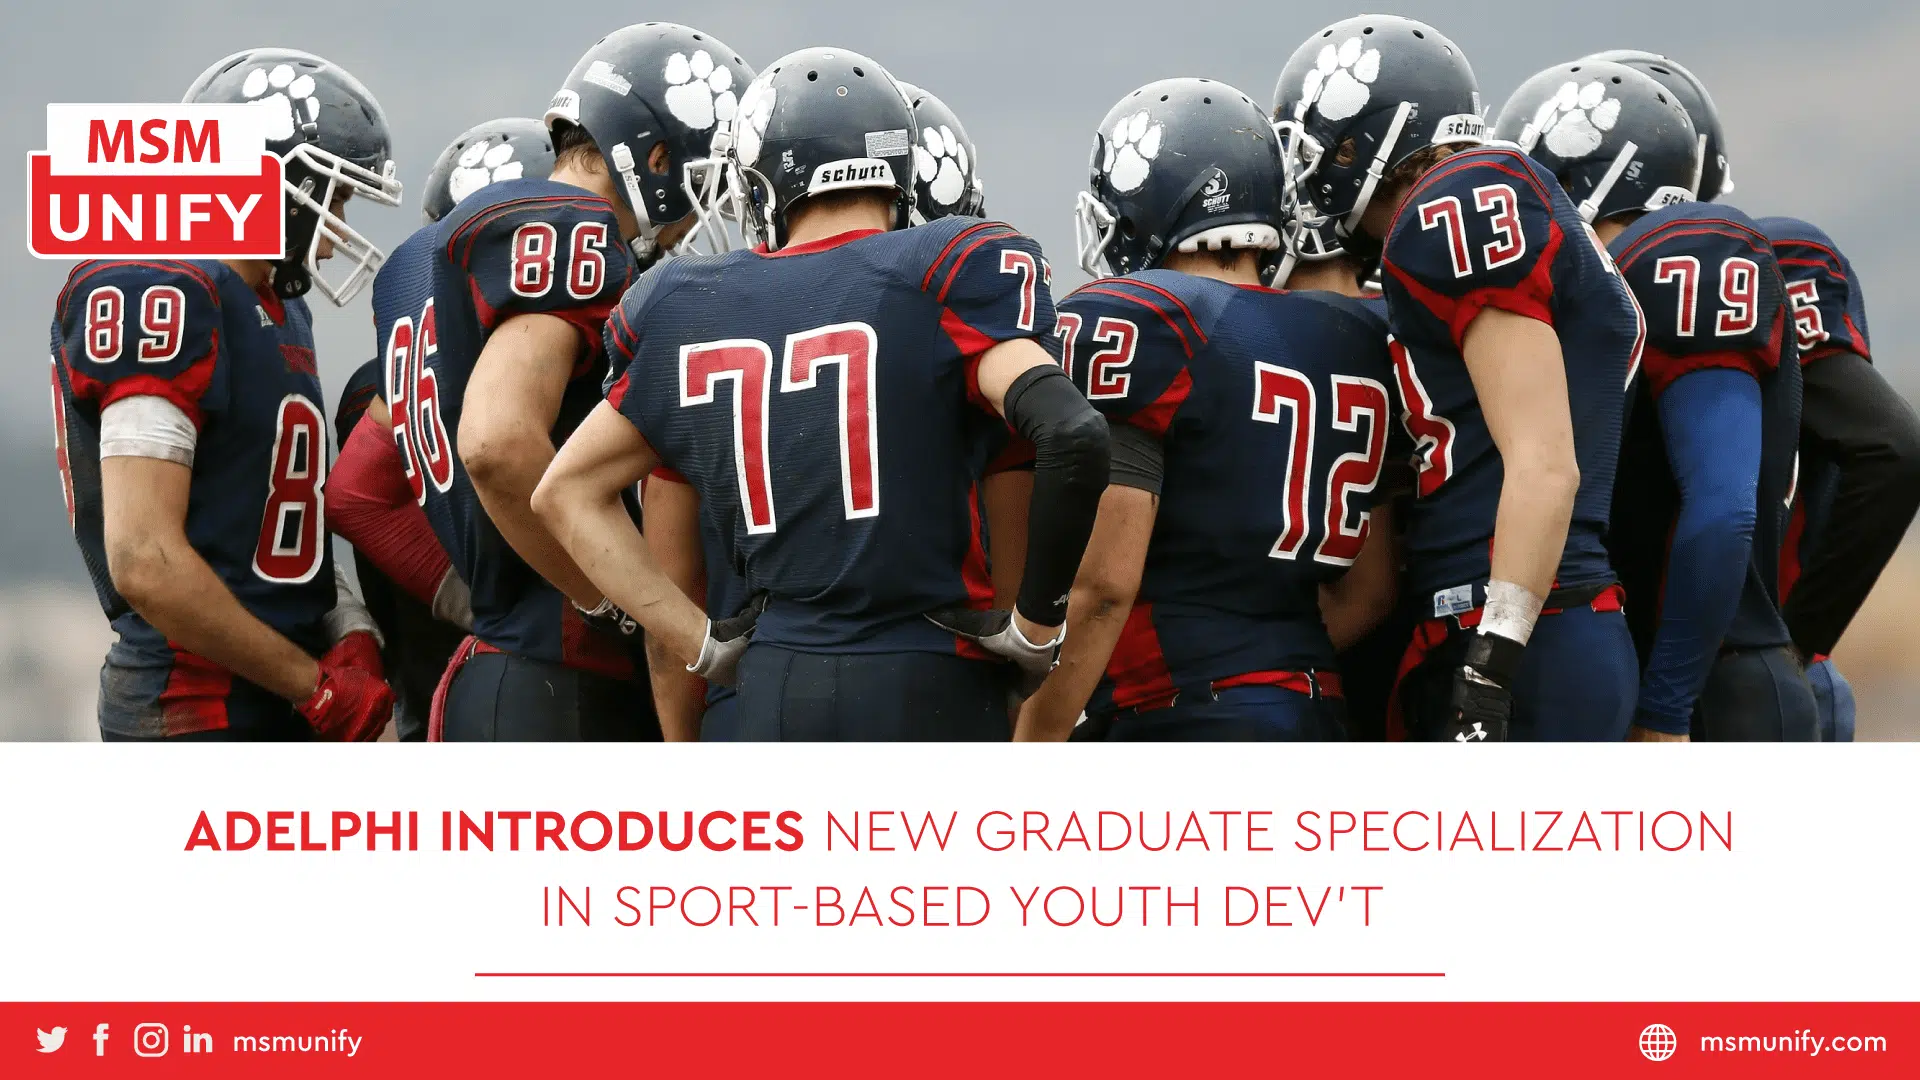 Adelphi Introduces New Graduate Specialization in Sport Based Youth Devt